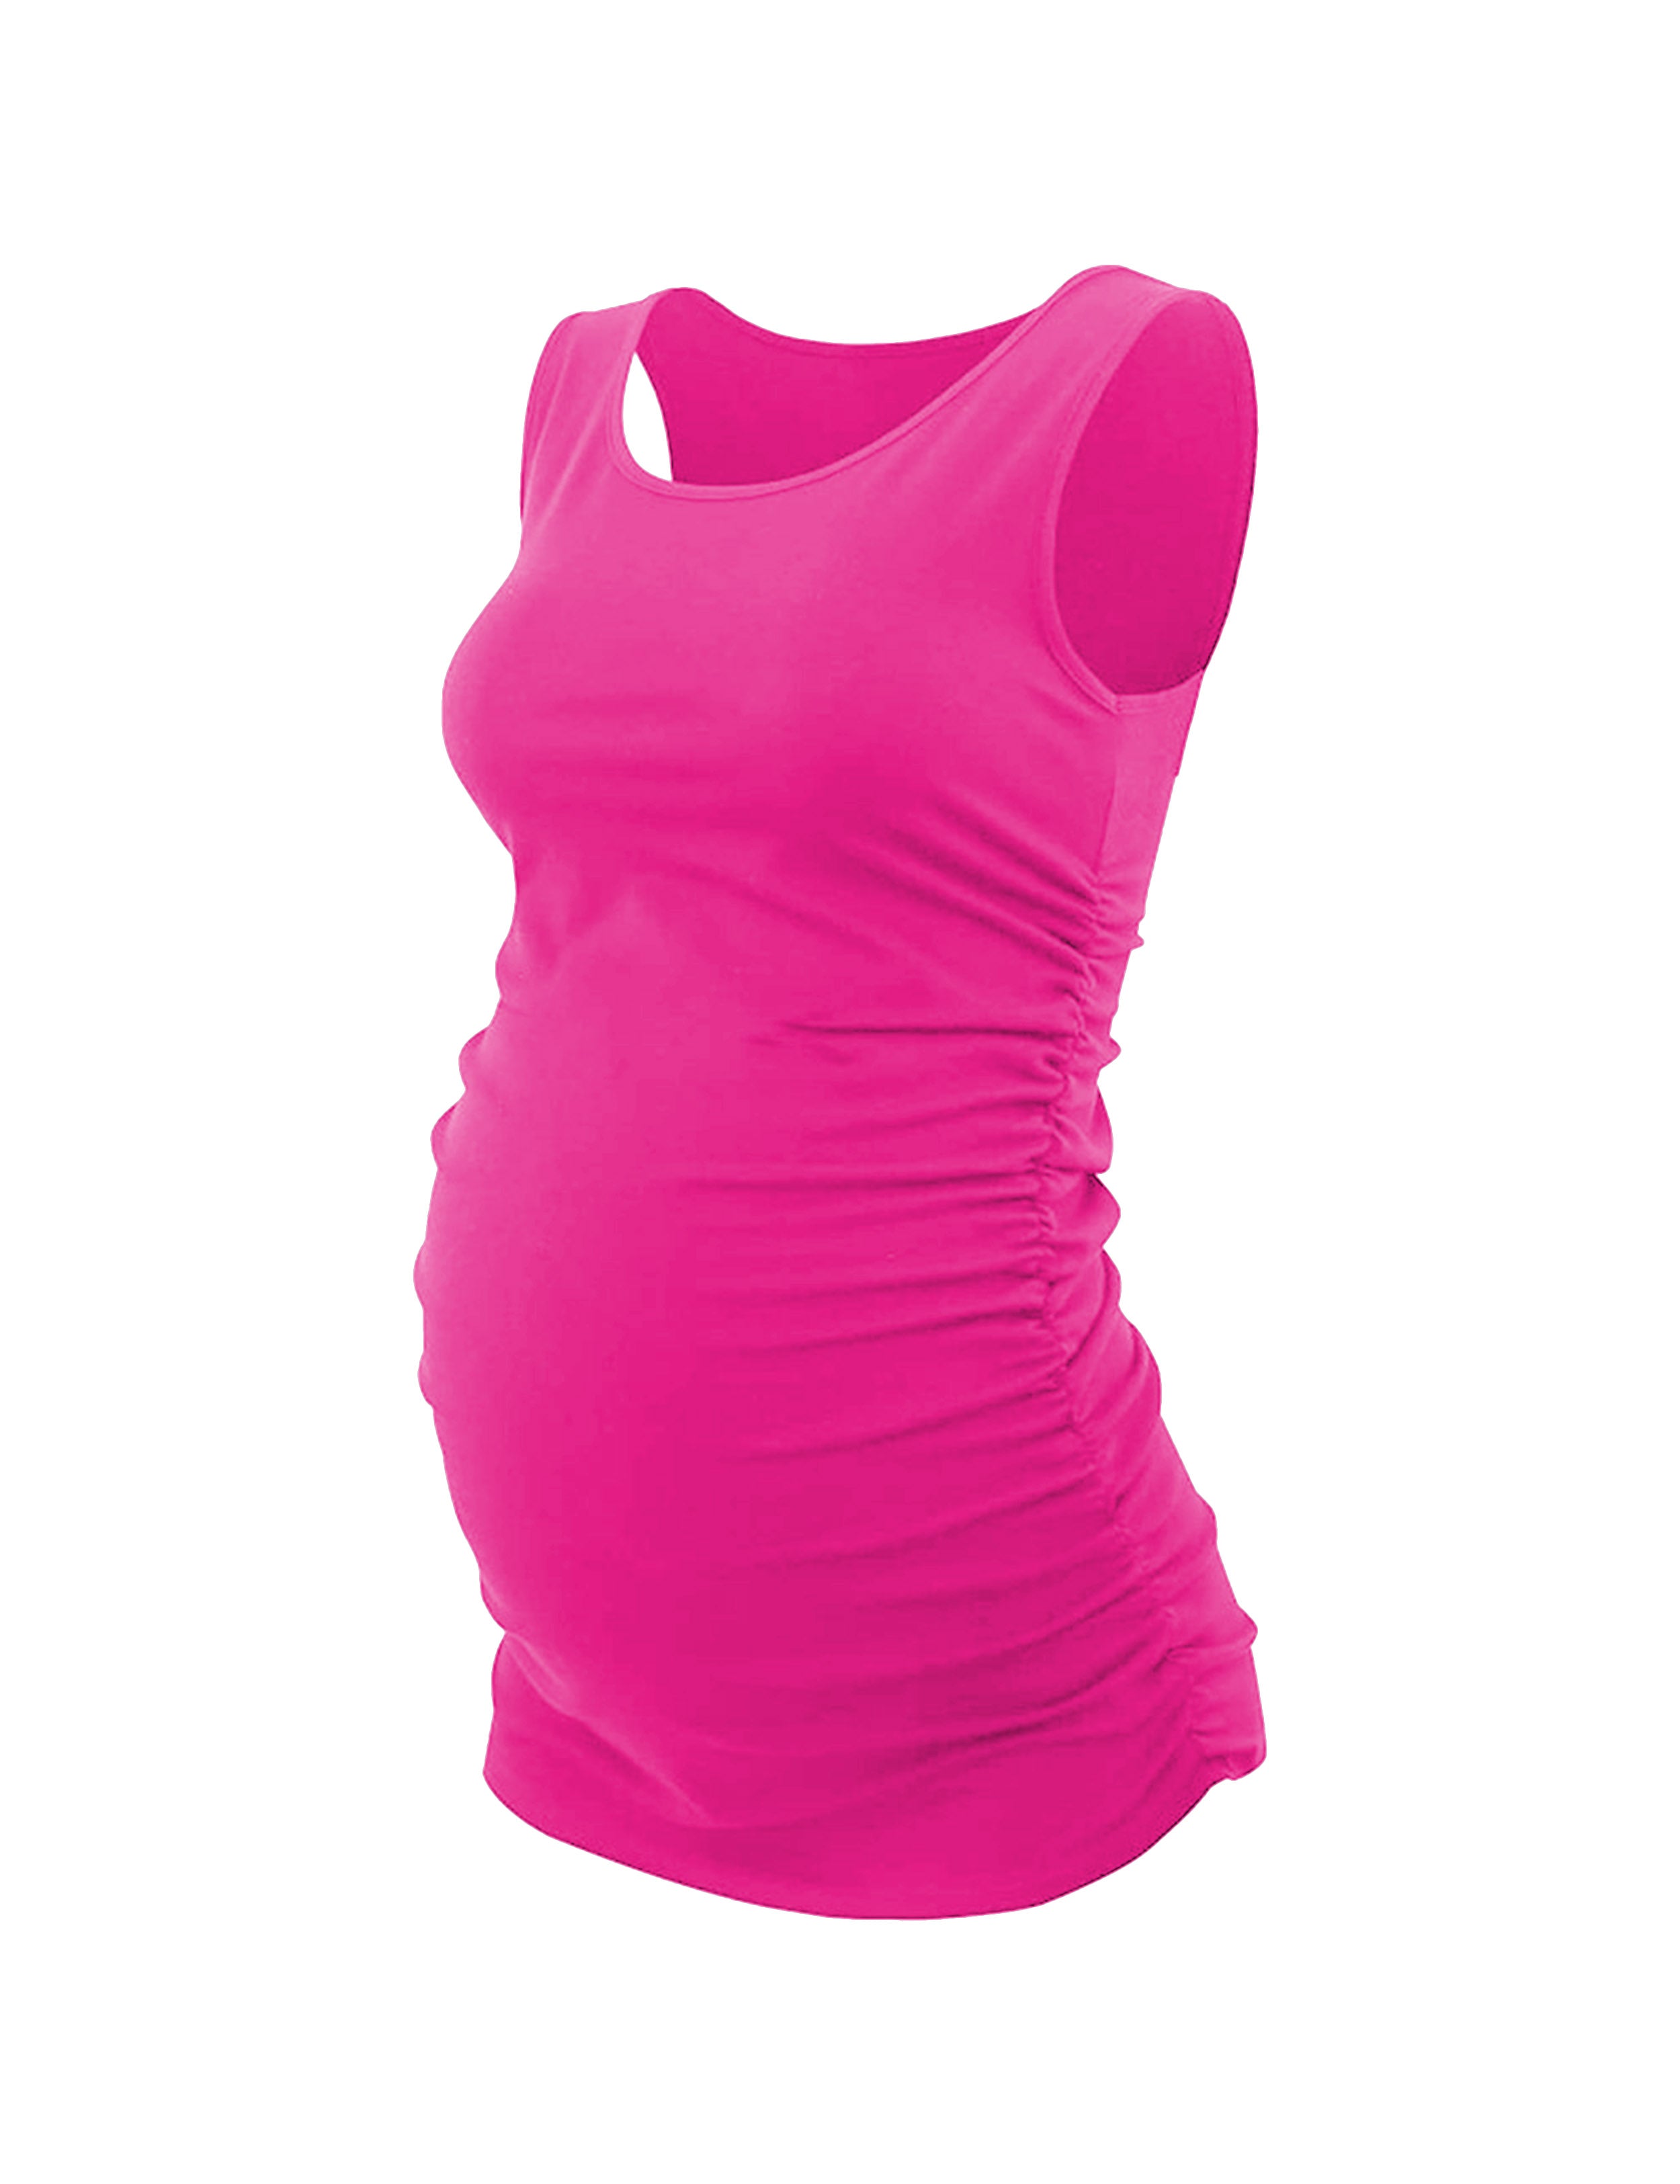 Maternity Side Shirred Tank Top magenta 92%Nylon/8%Spandex(Cotton Soft) Designed for Maternity So buttery soft, it feels weightless Sweat-wicking Four-way stretch Breathable Contours your body